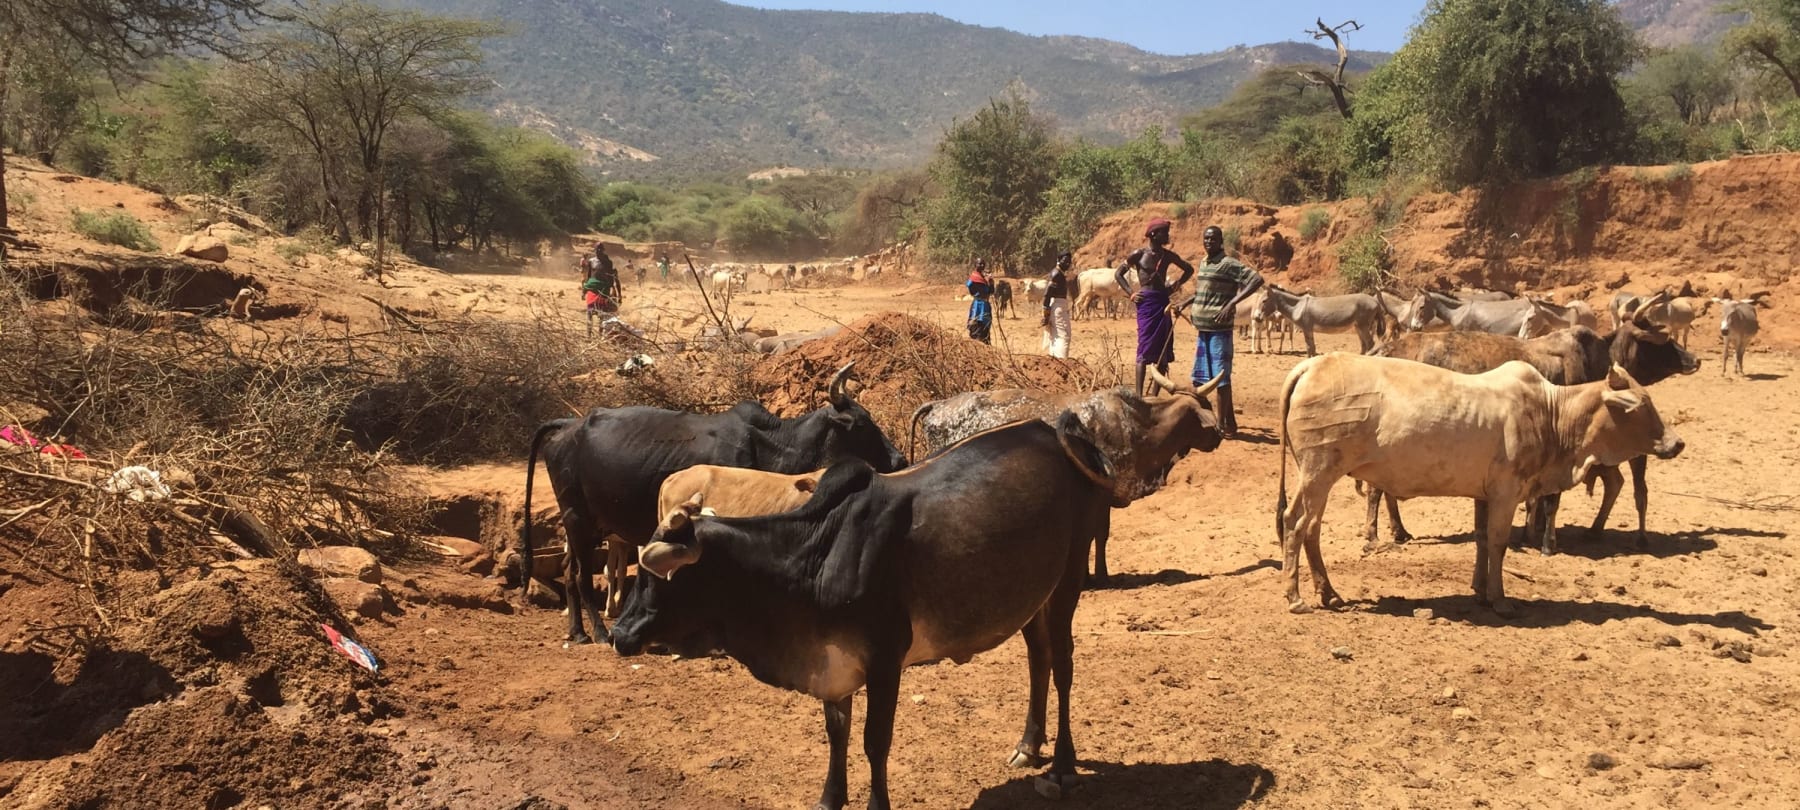 Extraordinary impact from sand dams in Northern Kenya